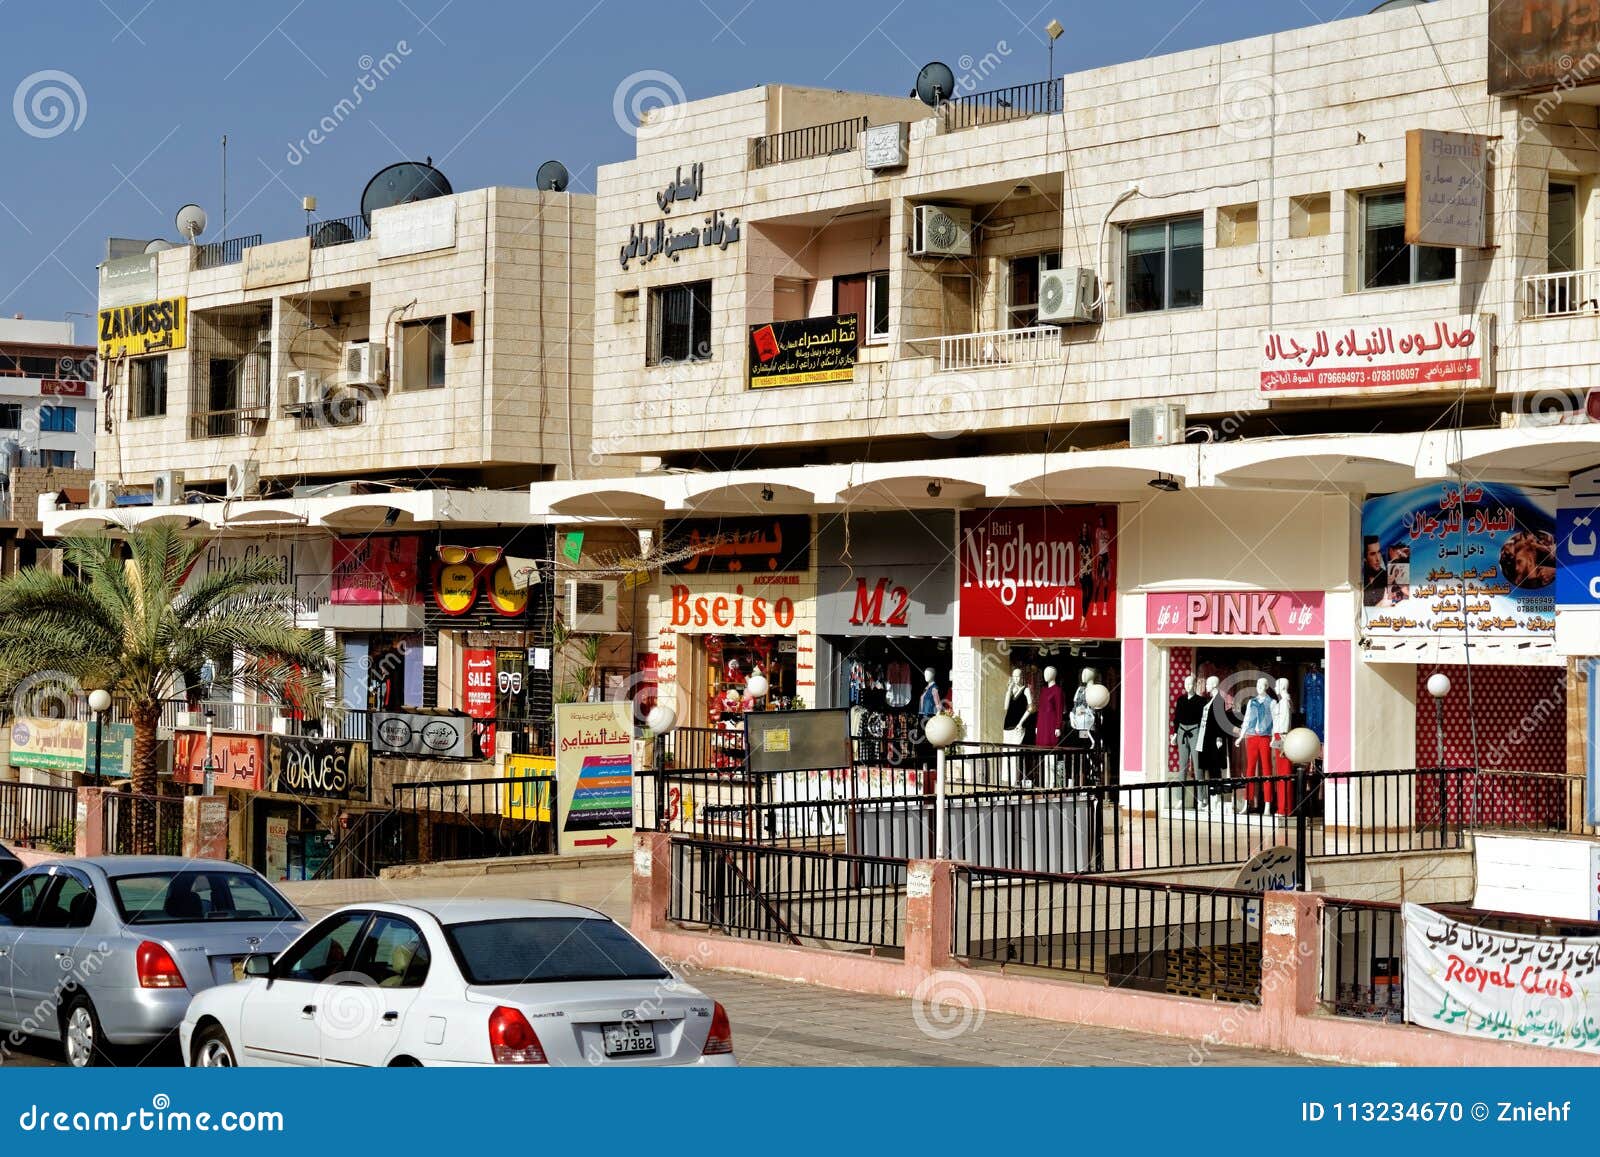 Aqaba, Jordan, March 2018: Main Shopping Street for Tourists with Textile and Jewellery Shops Behind Colourful Facades Editorial Image - Image of center, facade: